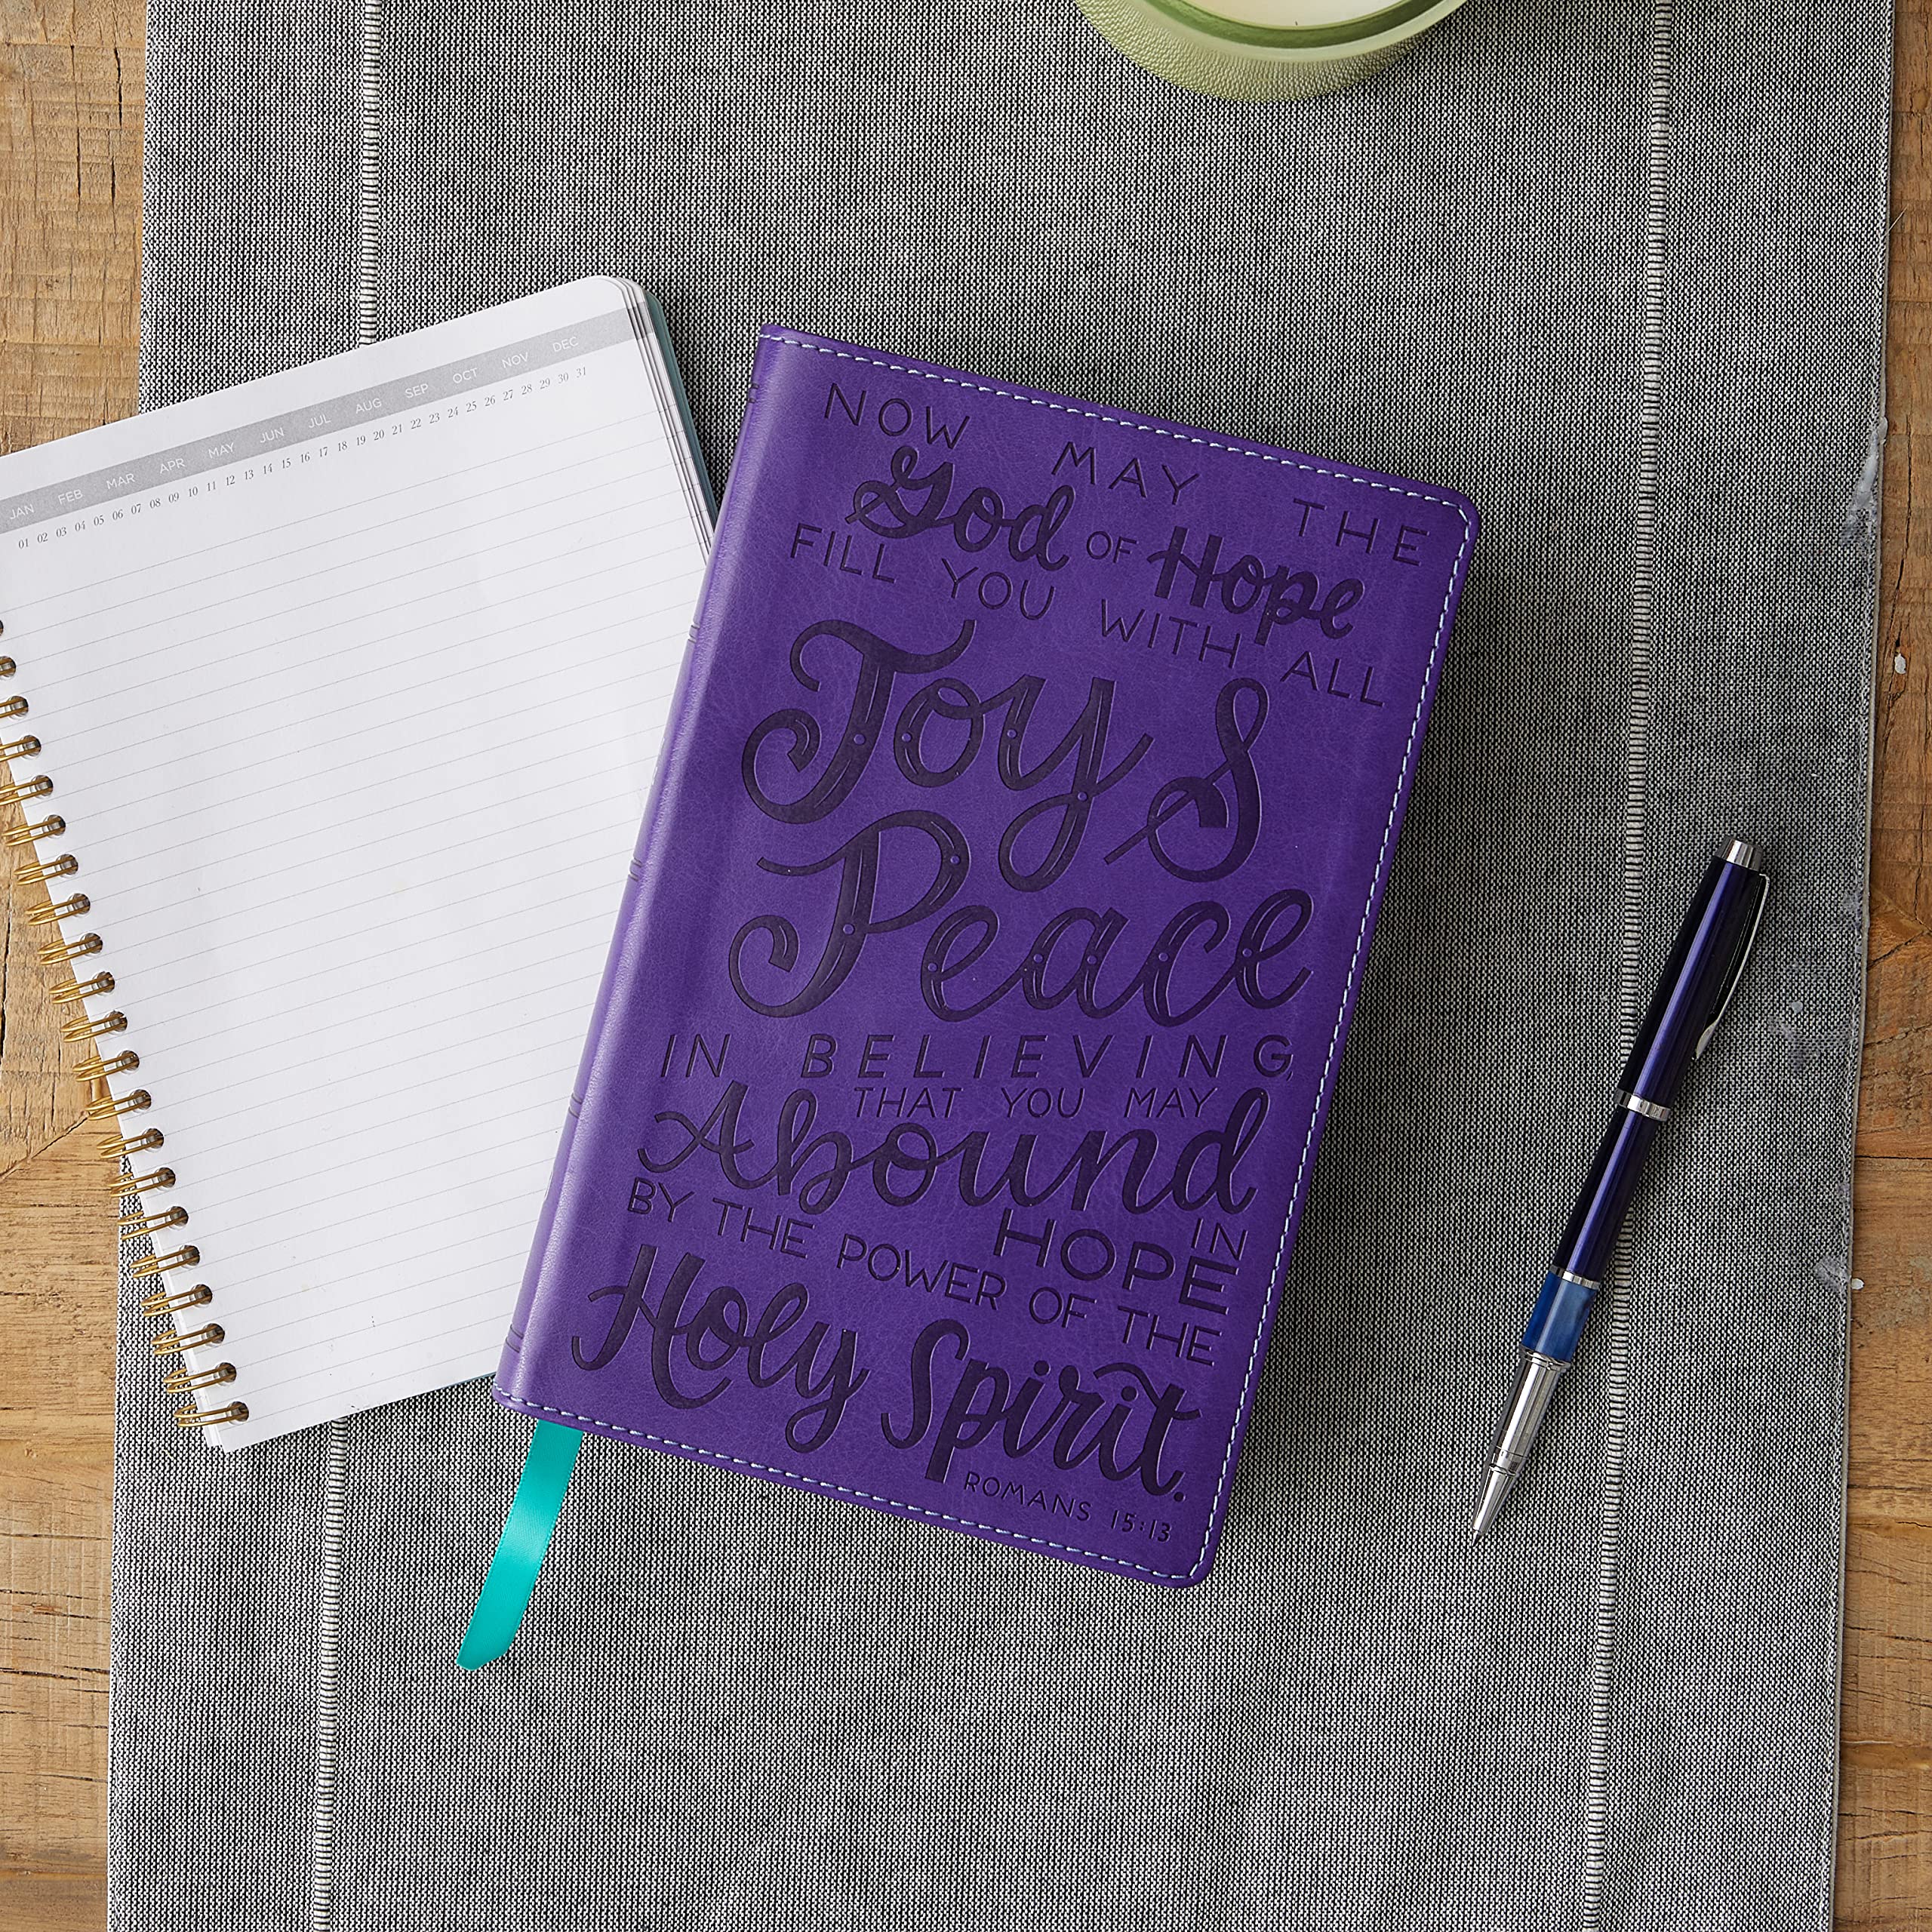 NKJV, Holy Bible for Kids, Verse Art Cover Collection, Leathersoft, Purple, Comfort Print: Holy Bible, New King James Version